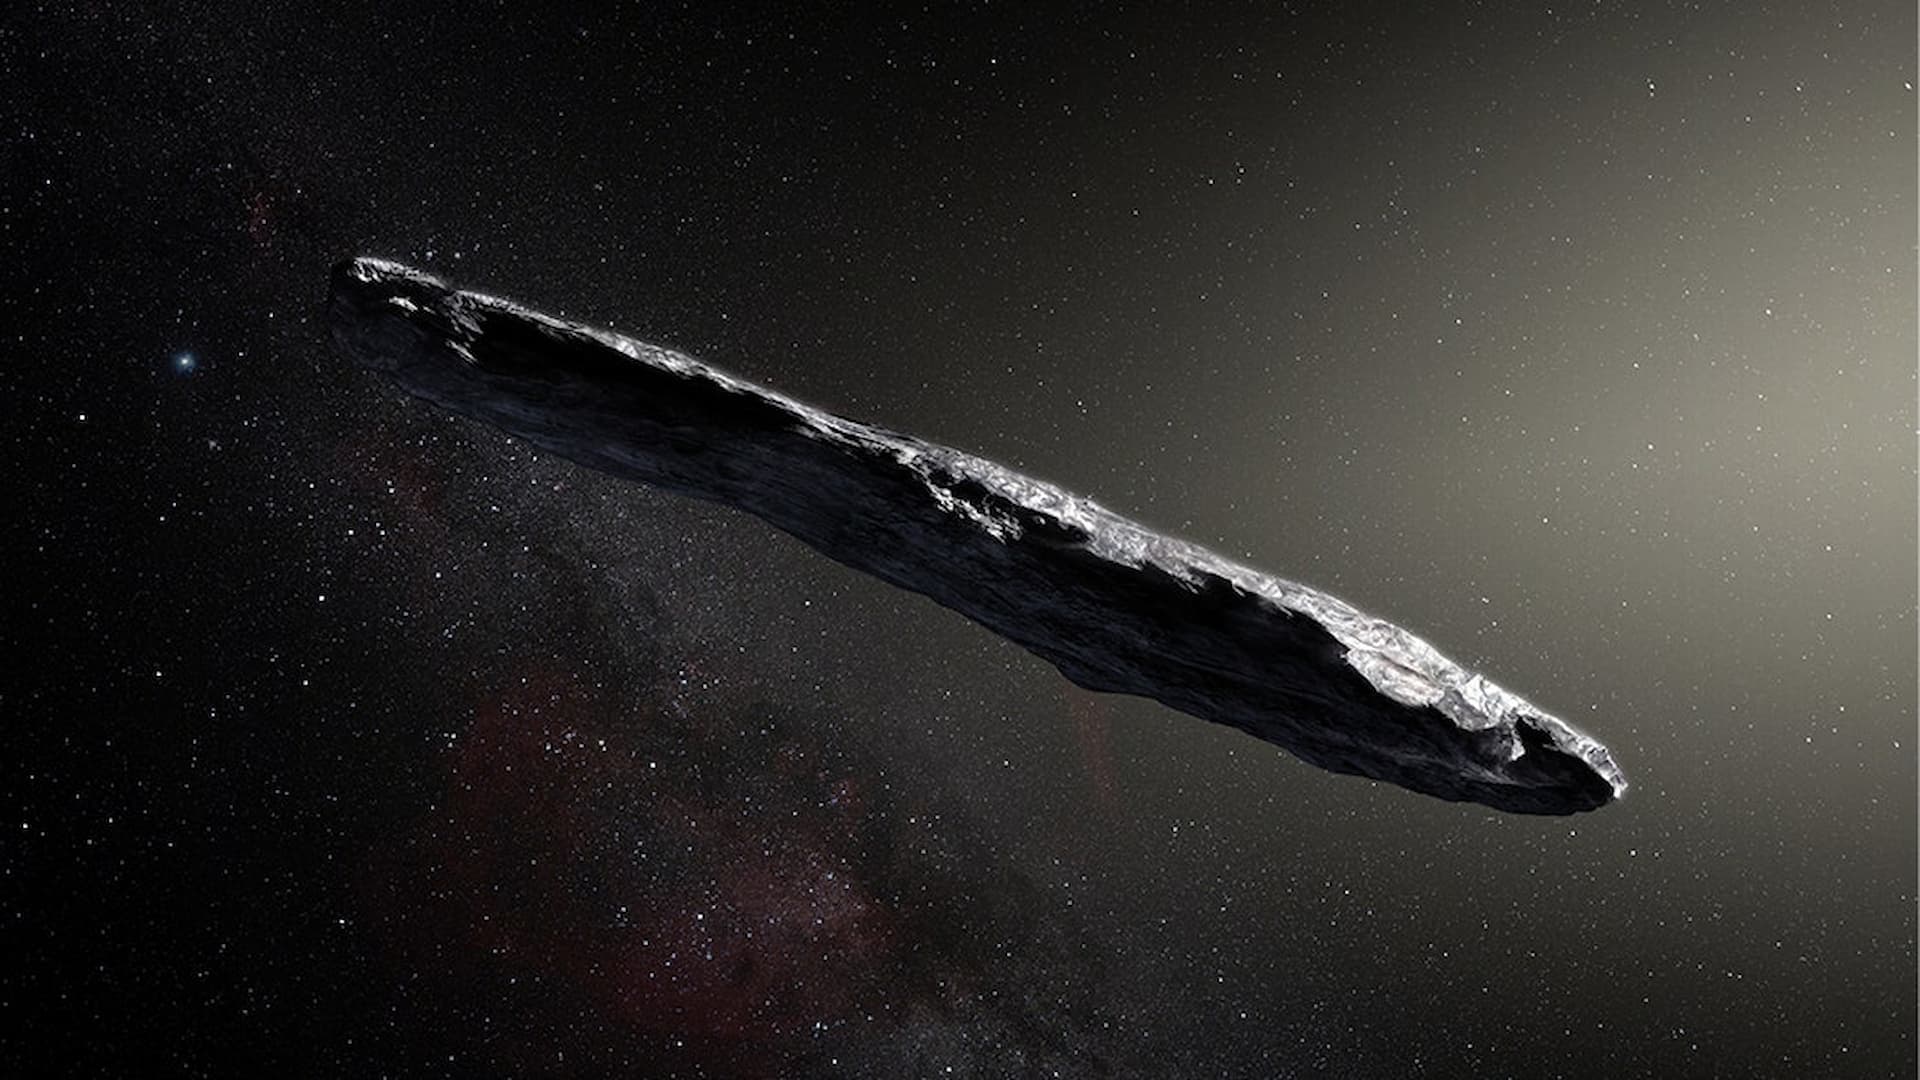 ASI - MORE ASI “The Galileo Project: In Search for Technological Interstellar Objects”